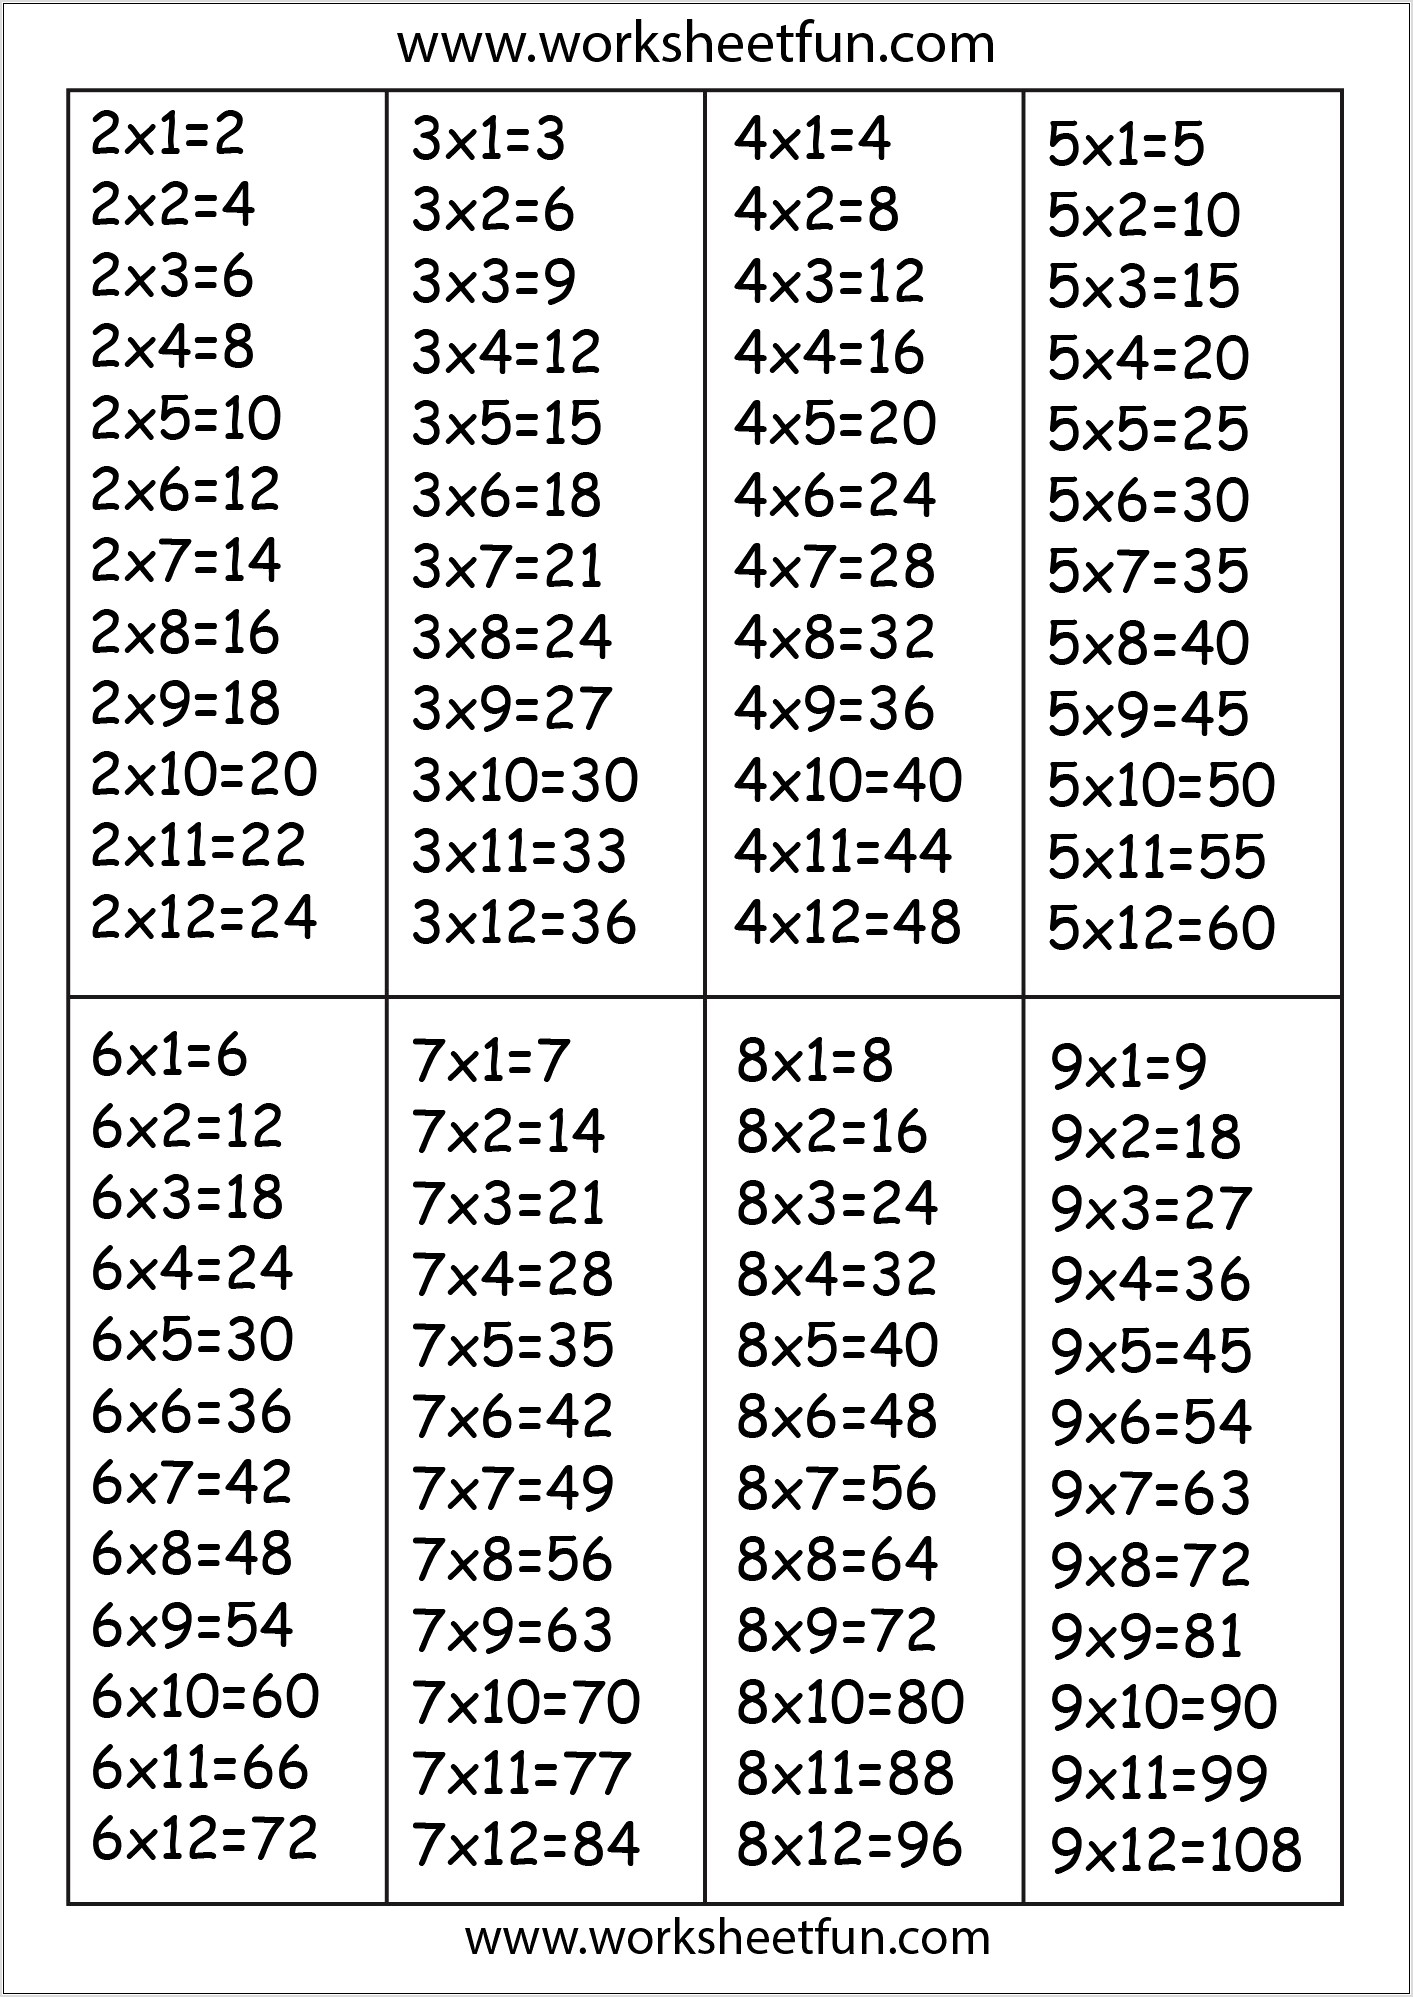 Times Table Worksheets Answers